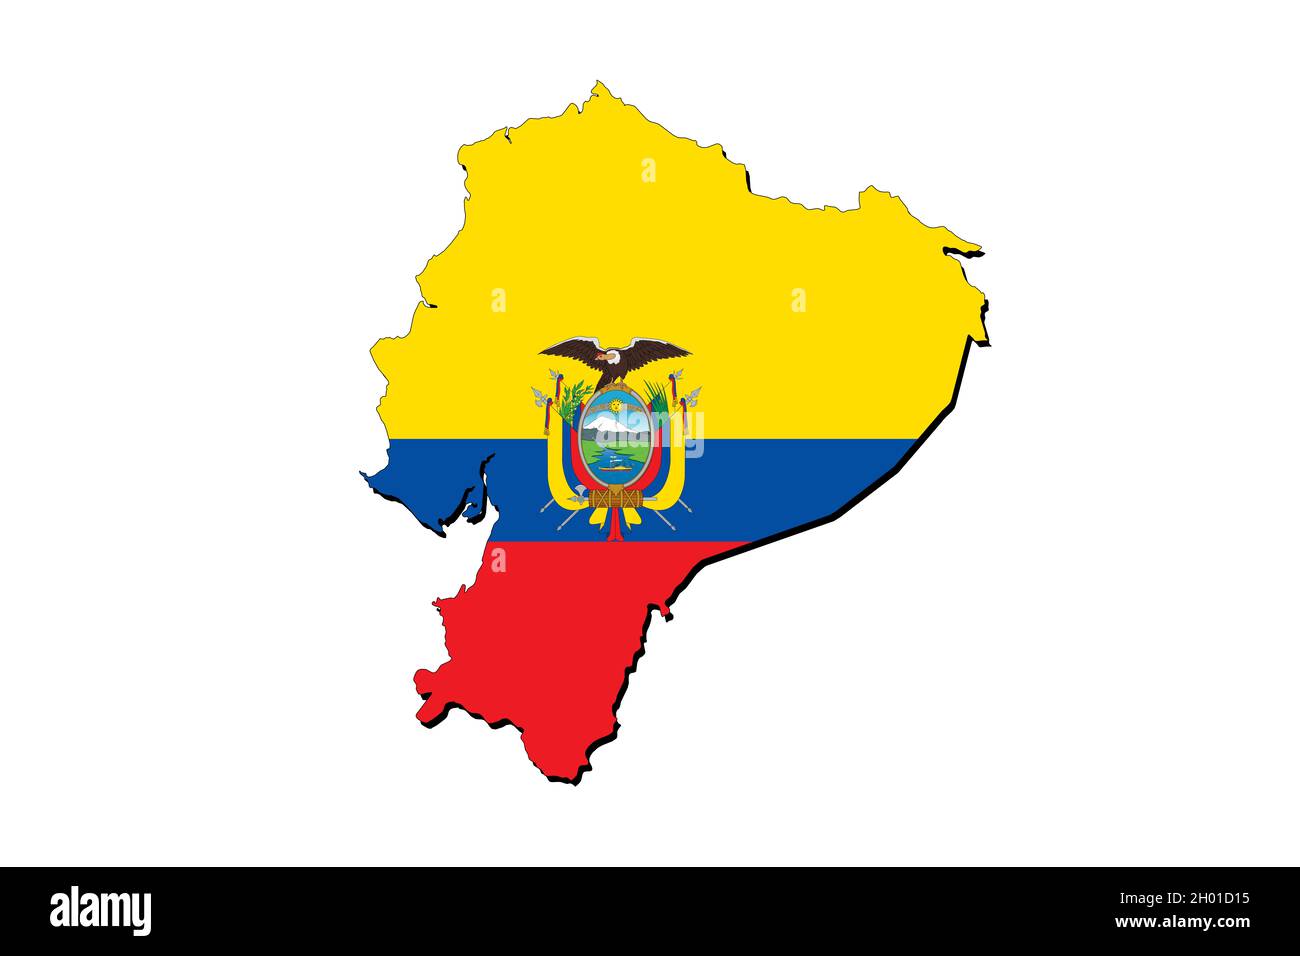 Outline map of Ecuador with the national flag superimposed over the country. 3D graphics casting a shadow on the white background Stock Photo